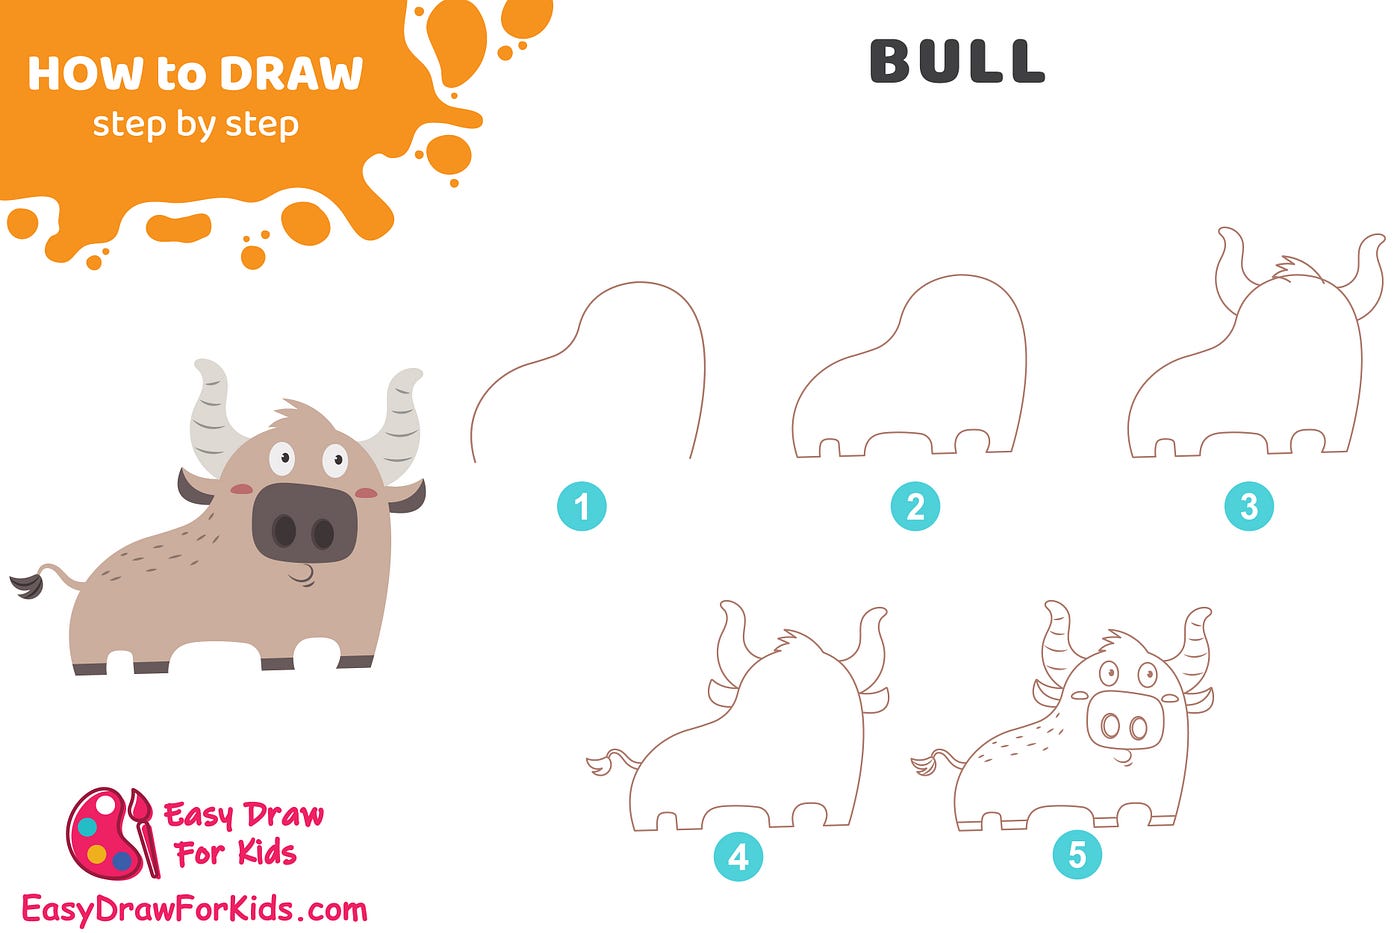 How to Draw a Capybara: A Step-by-Step Guide by Easydrawforkids - Make  better art